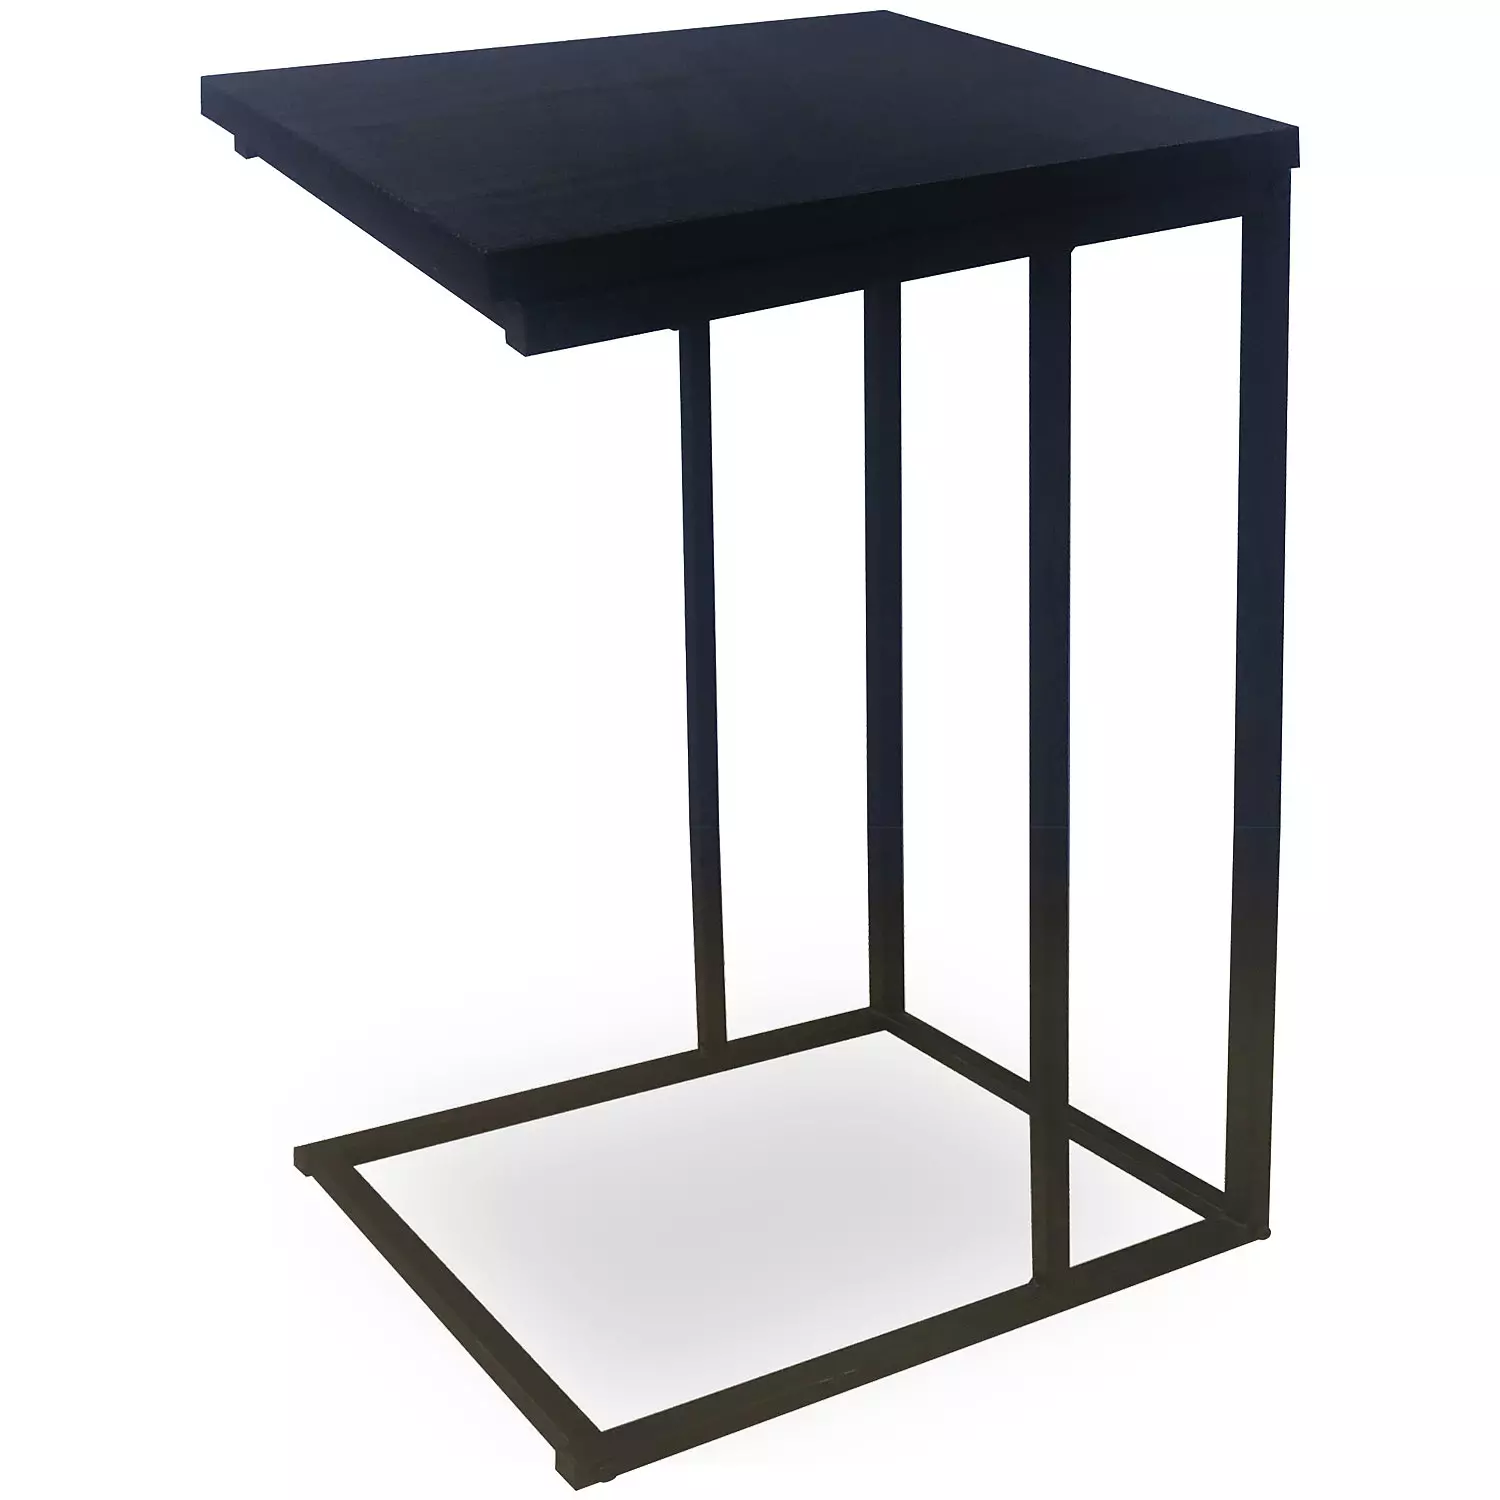 Accent table, black